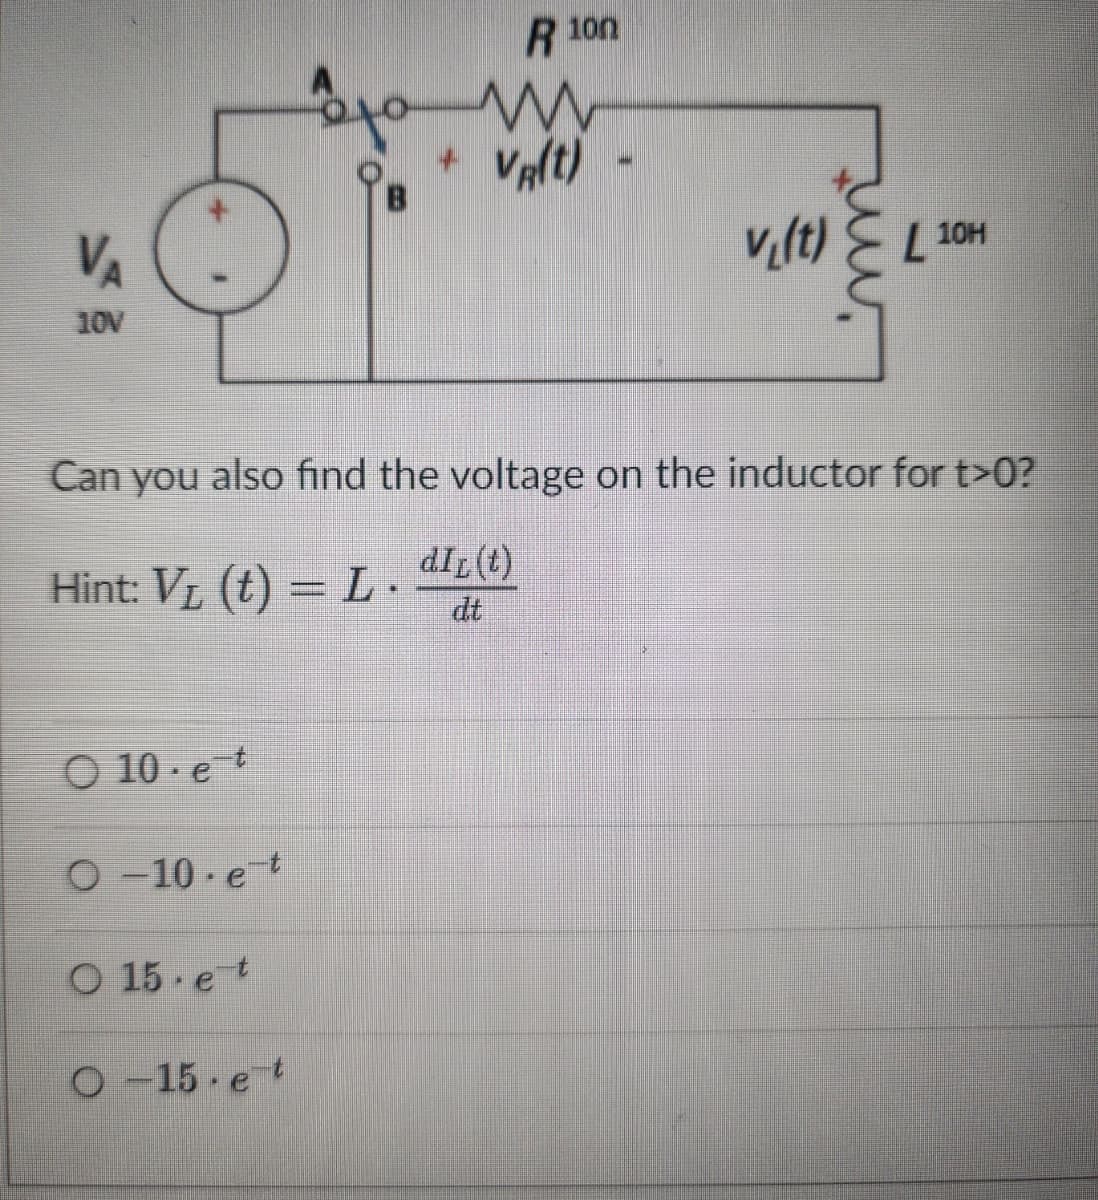 VA
10V
Hint: V₁ (t) = L.
O 10. et
O-10 et
ܩܢܘ
O 15 et
O-15 et
R 100
m
VR(T)
+
Can you also find the voltage on the inductor for t>0?
dIL (t)
v₁(t)
L
10H